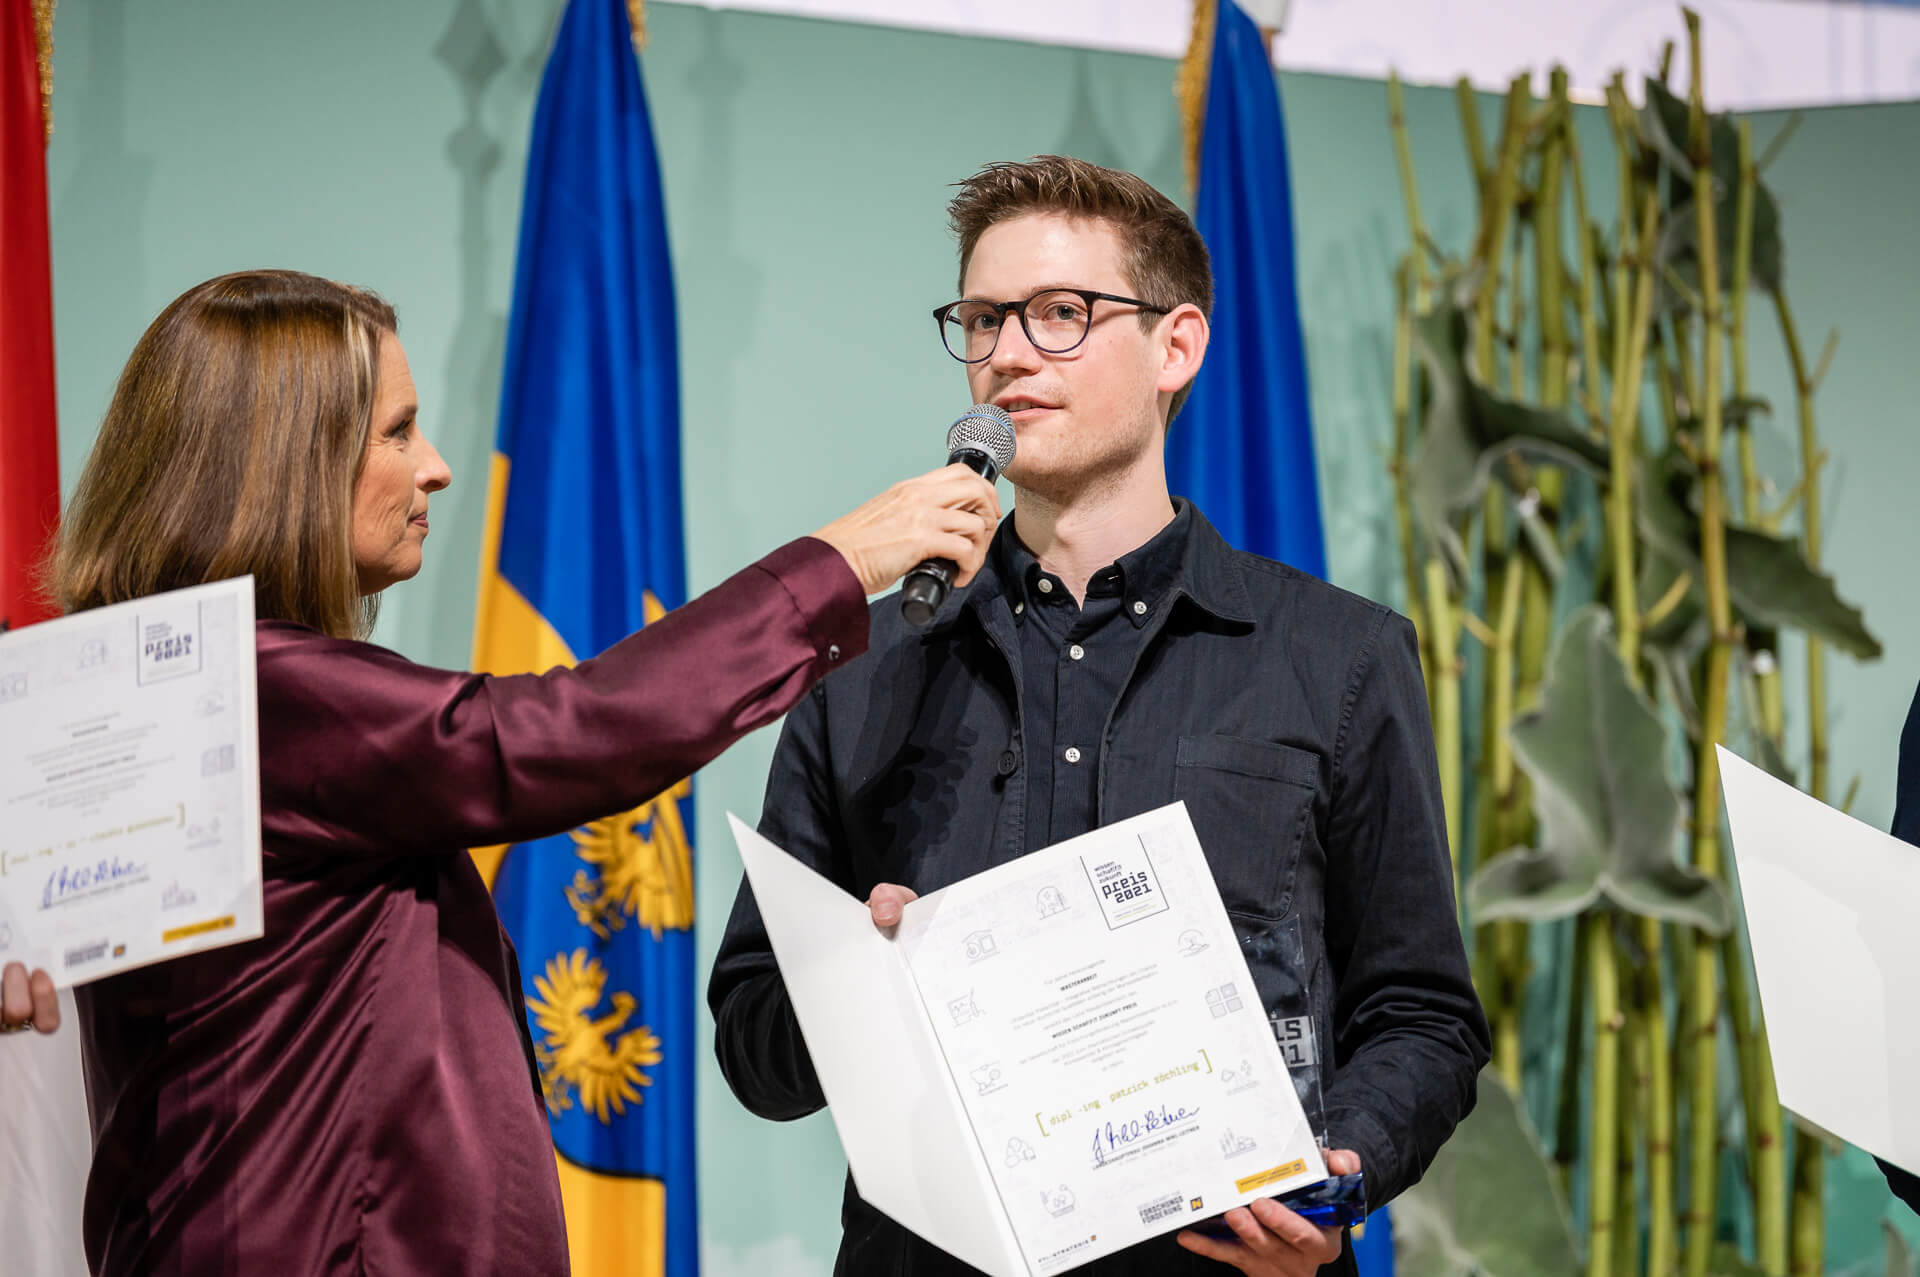 A topic for a practically relevant thesis was found and awarded the Science Future Prize 2021!